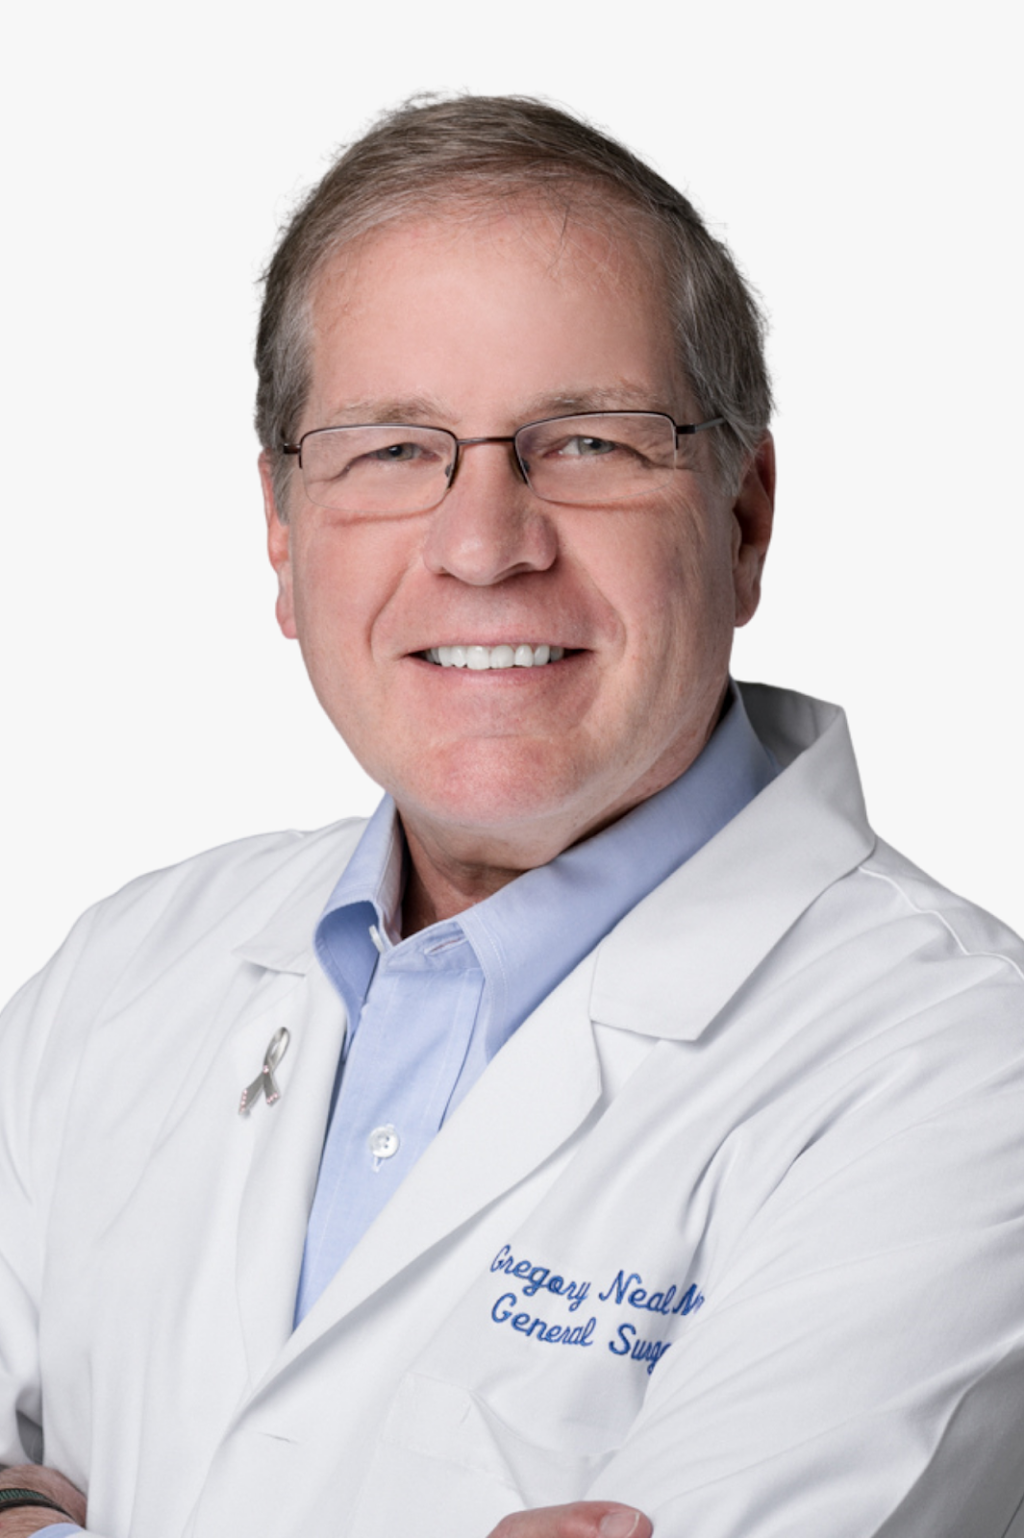 Dr. Gregory E. Neal, MD, FACS | Wound Care are TriStar Centennial Medical Center 2400 Patterson Street |, Suite 304, Nashville, TN 37203, USA | Phone: (615) 865-0700